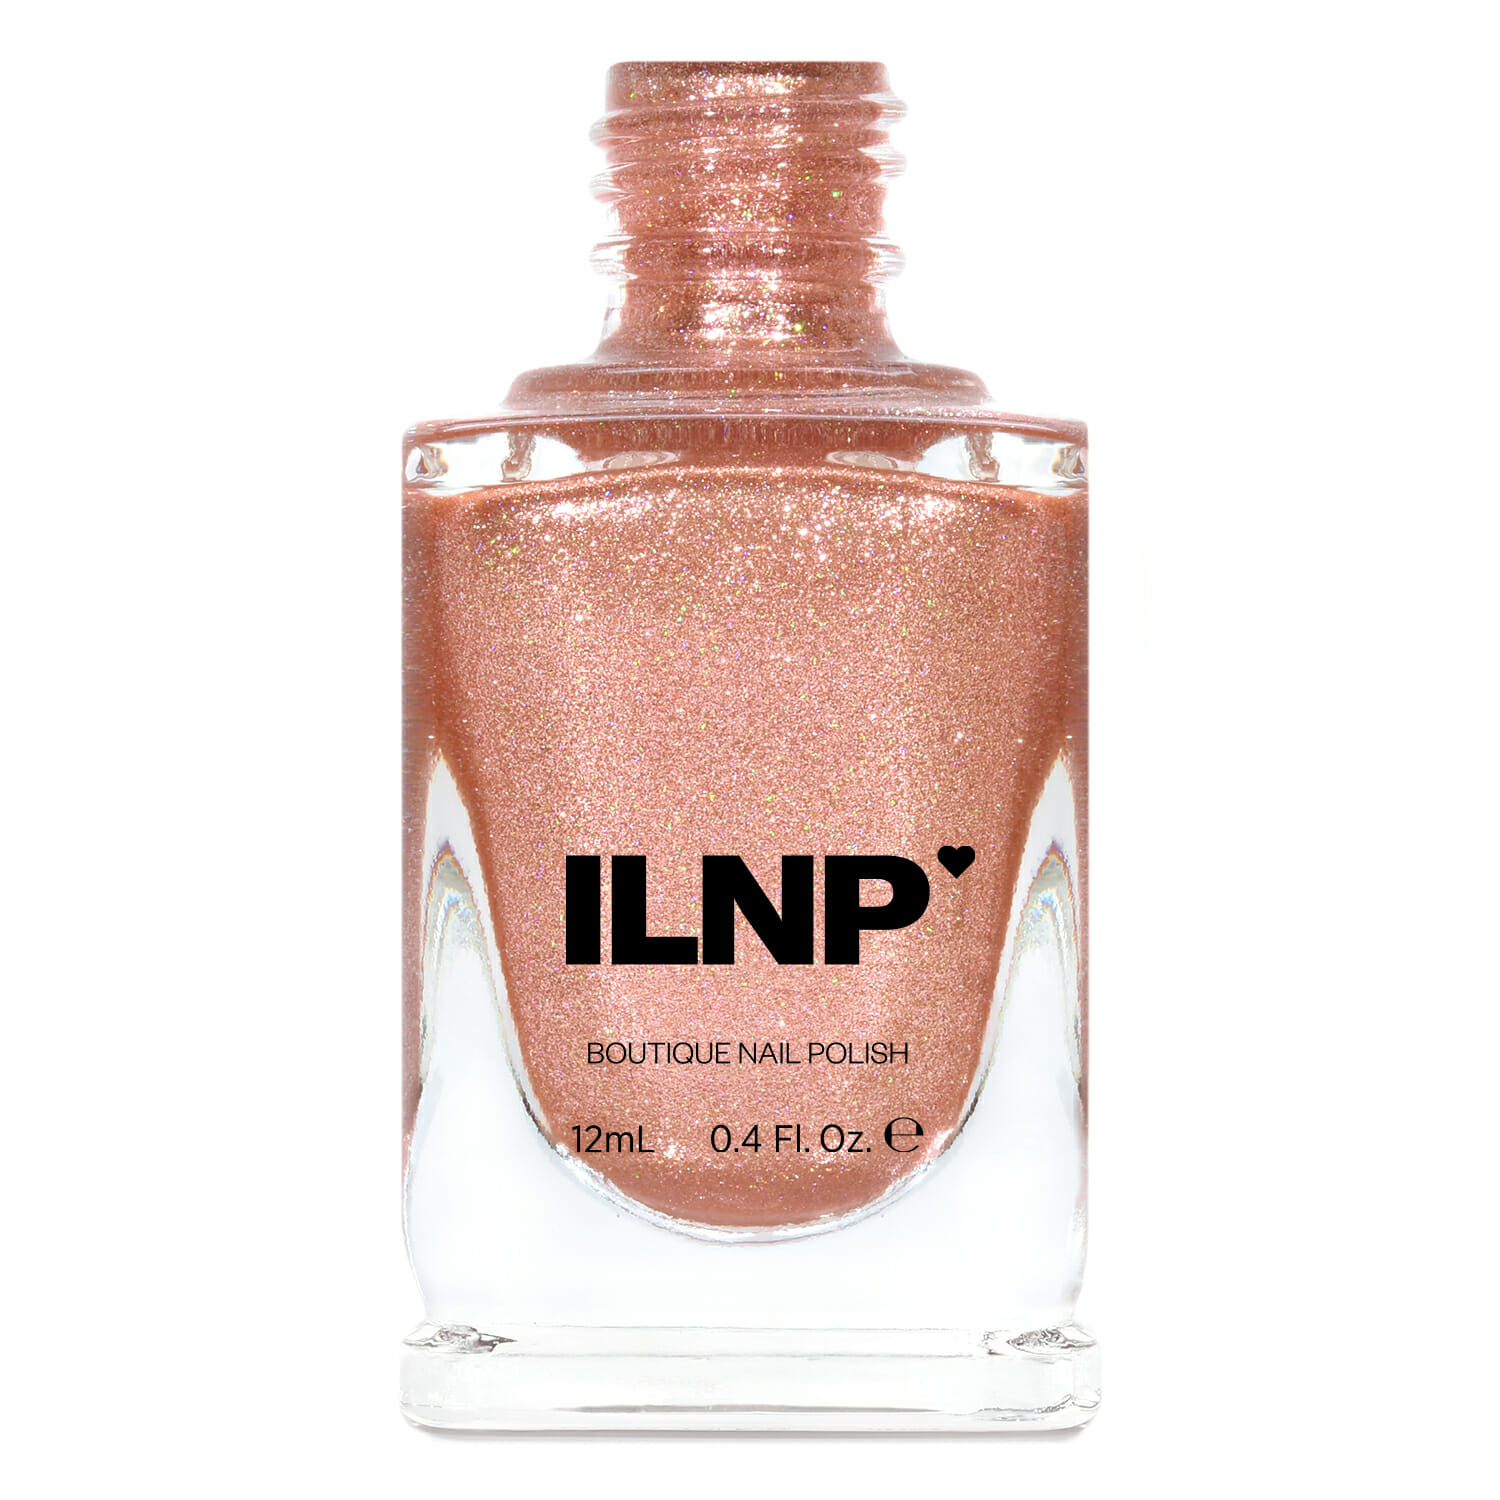 Chelsea - Pale Rose Gold Holographic Ultra Metallic Nail Polish by ILNP